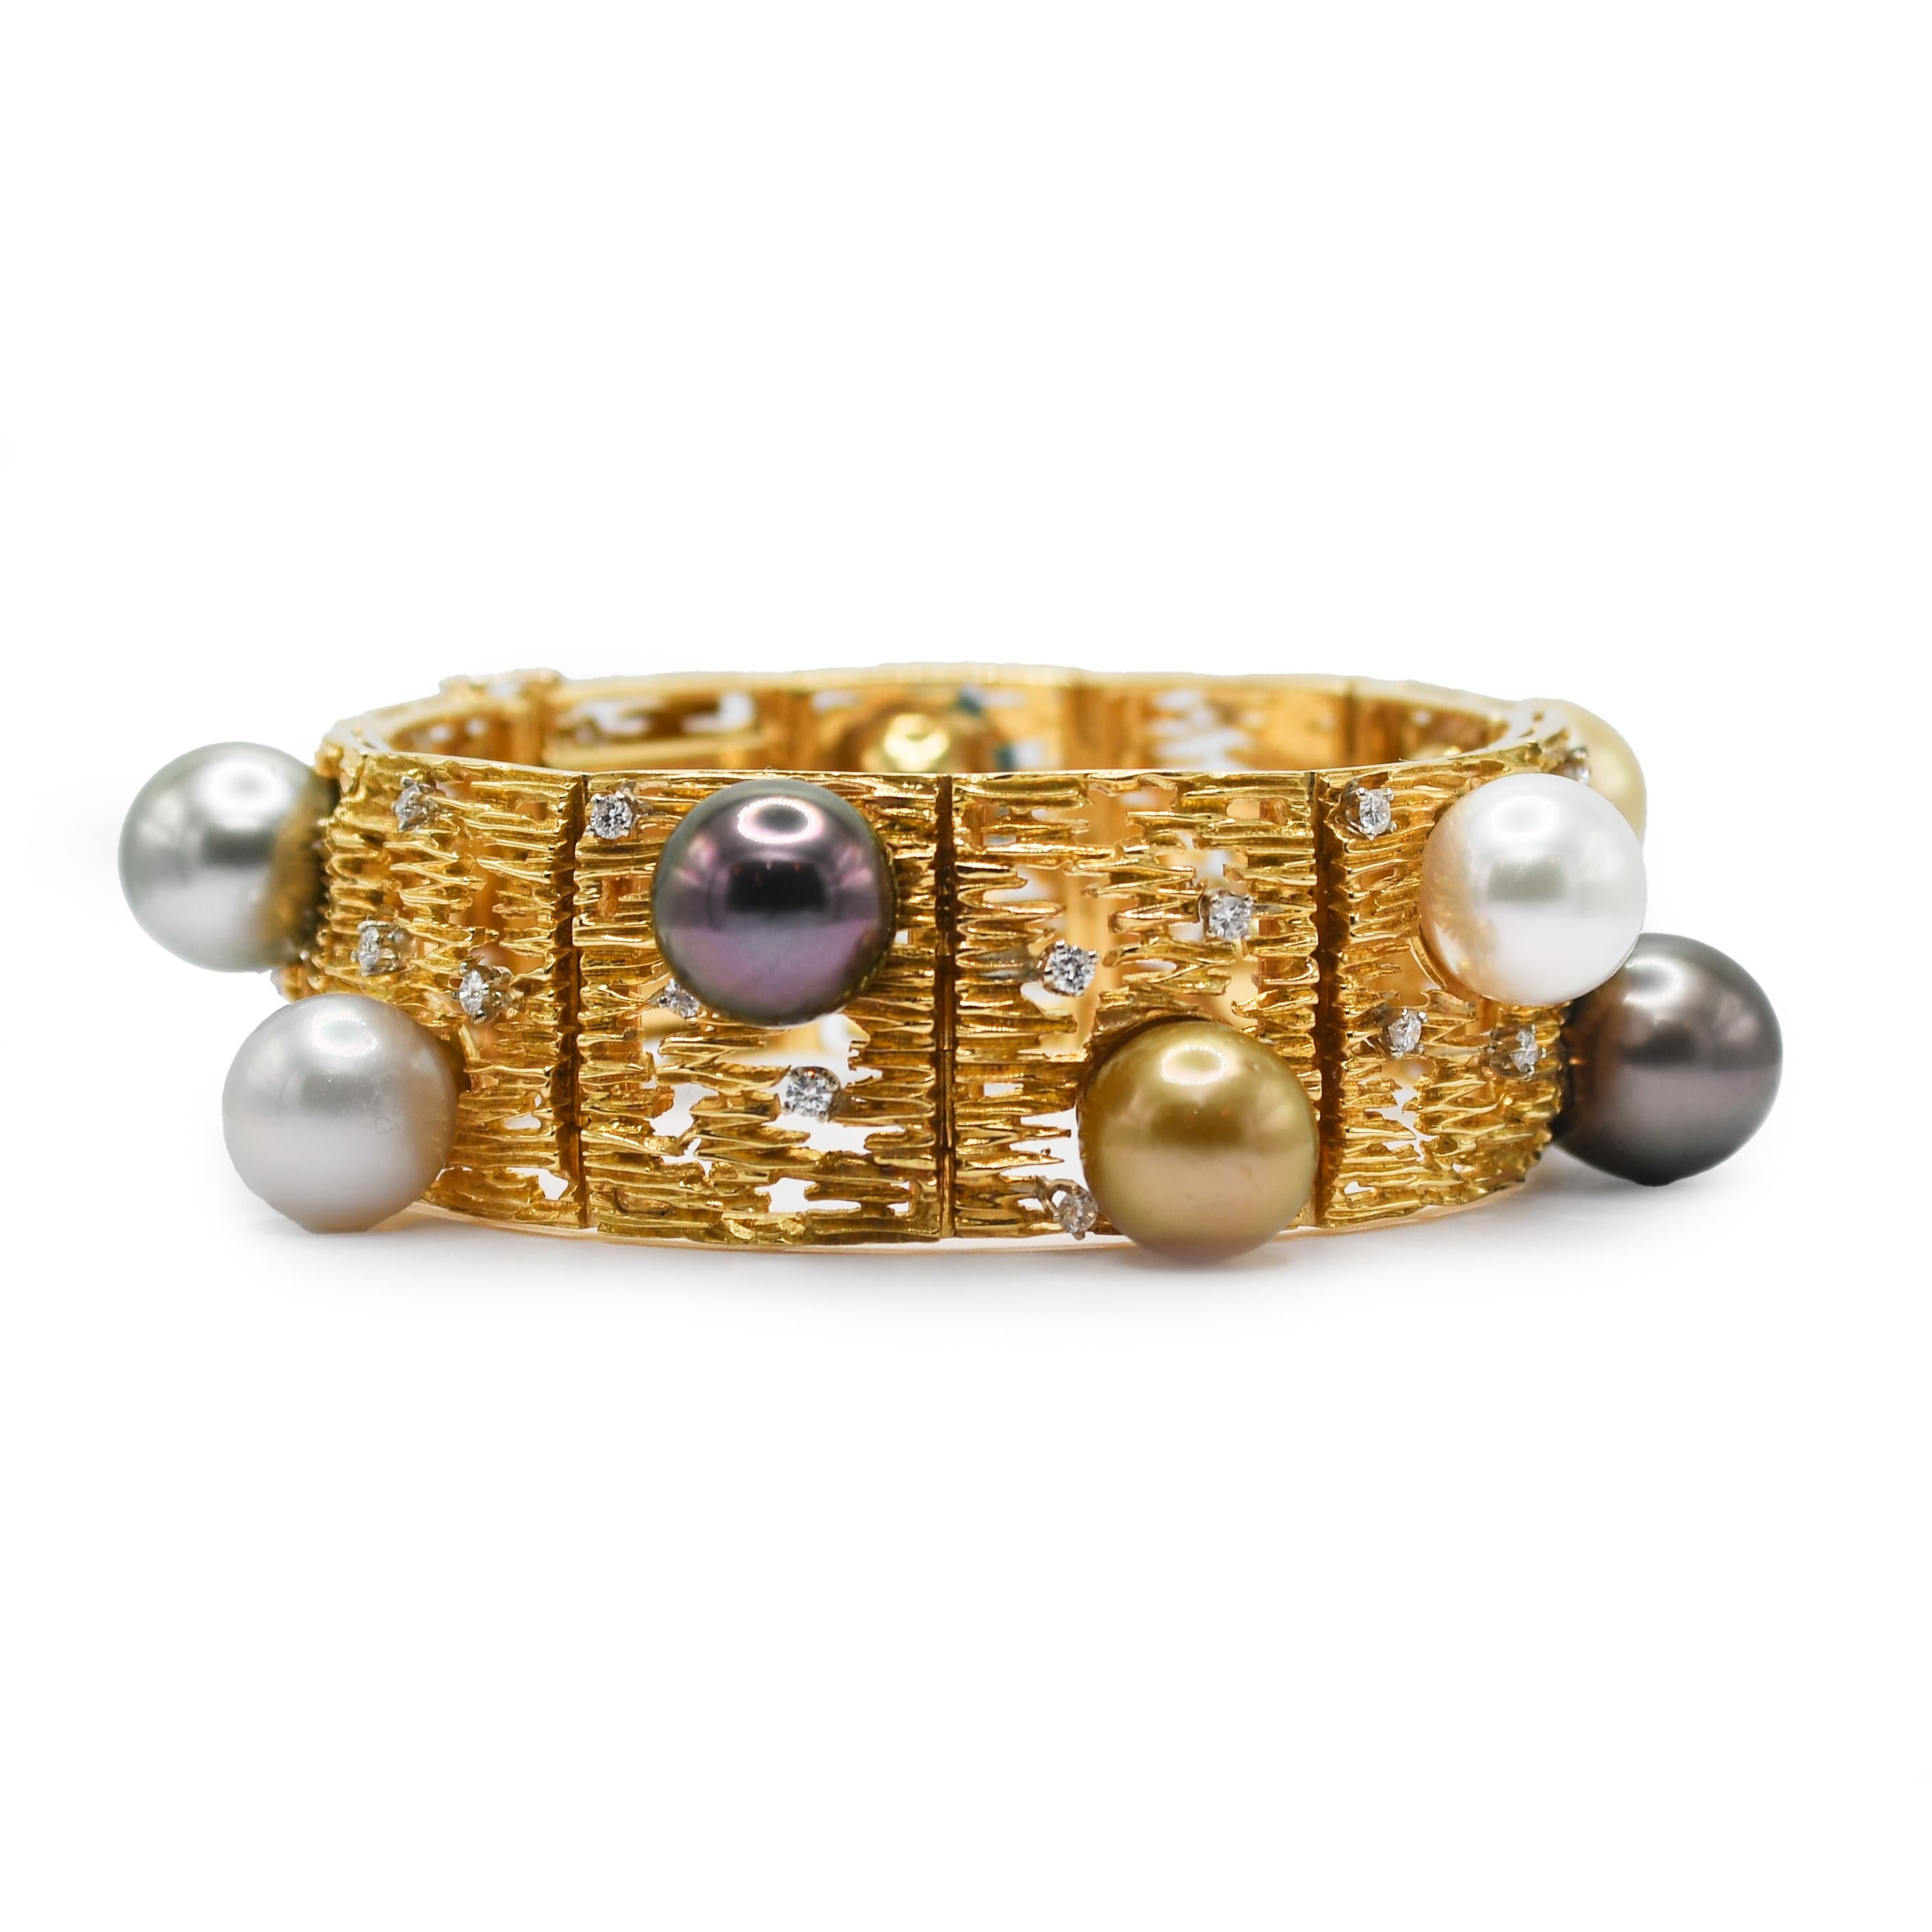 Ladies' custom-made South Sea pearl and diamond bracelet in 18k yellow gold setting.
The inside of the first link is stamped 18k.
It also tests 18k with an electronic tester.
The gross weight of the bracelet is 100 grams.
The pearl ranges in size